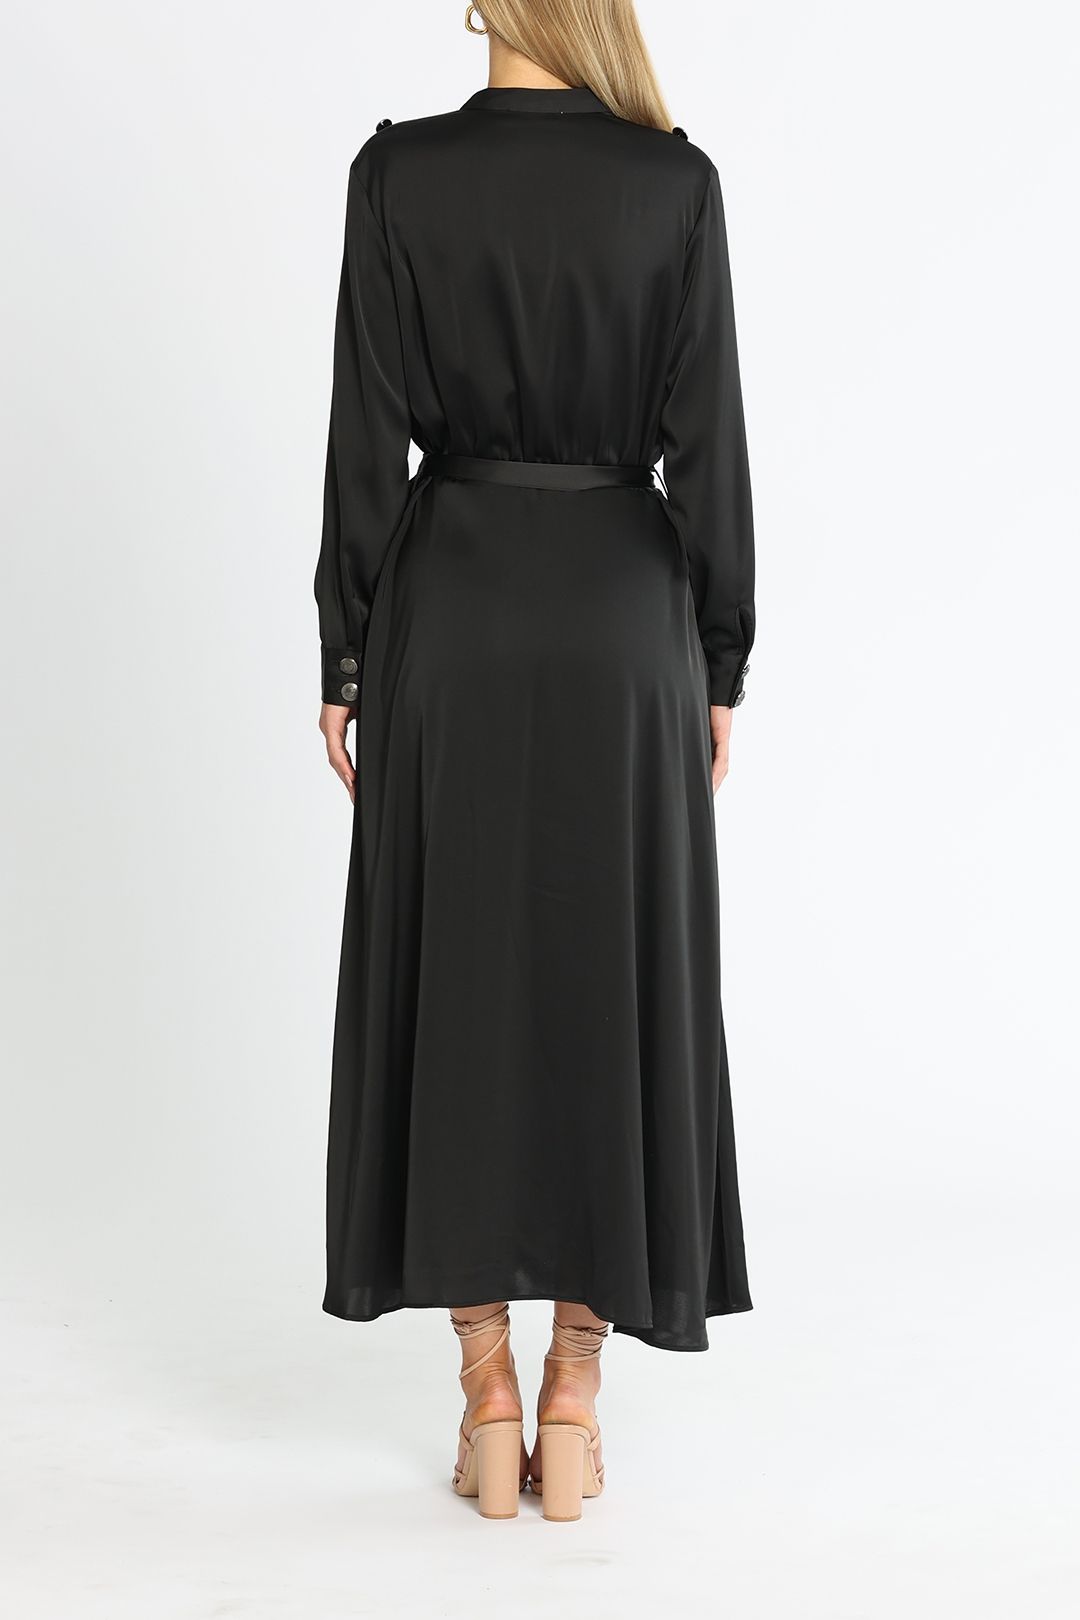 Belle and Bloom Lover To Lover Maxi Shirt Dress Black Long Sleeves